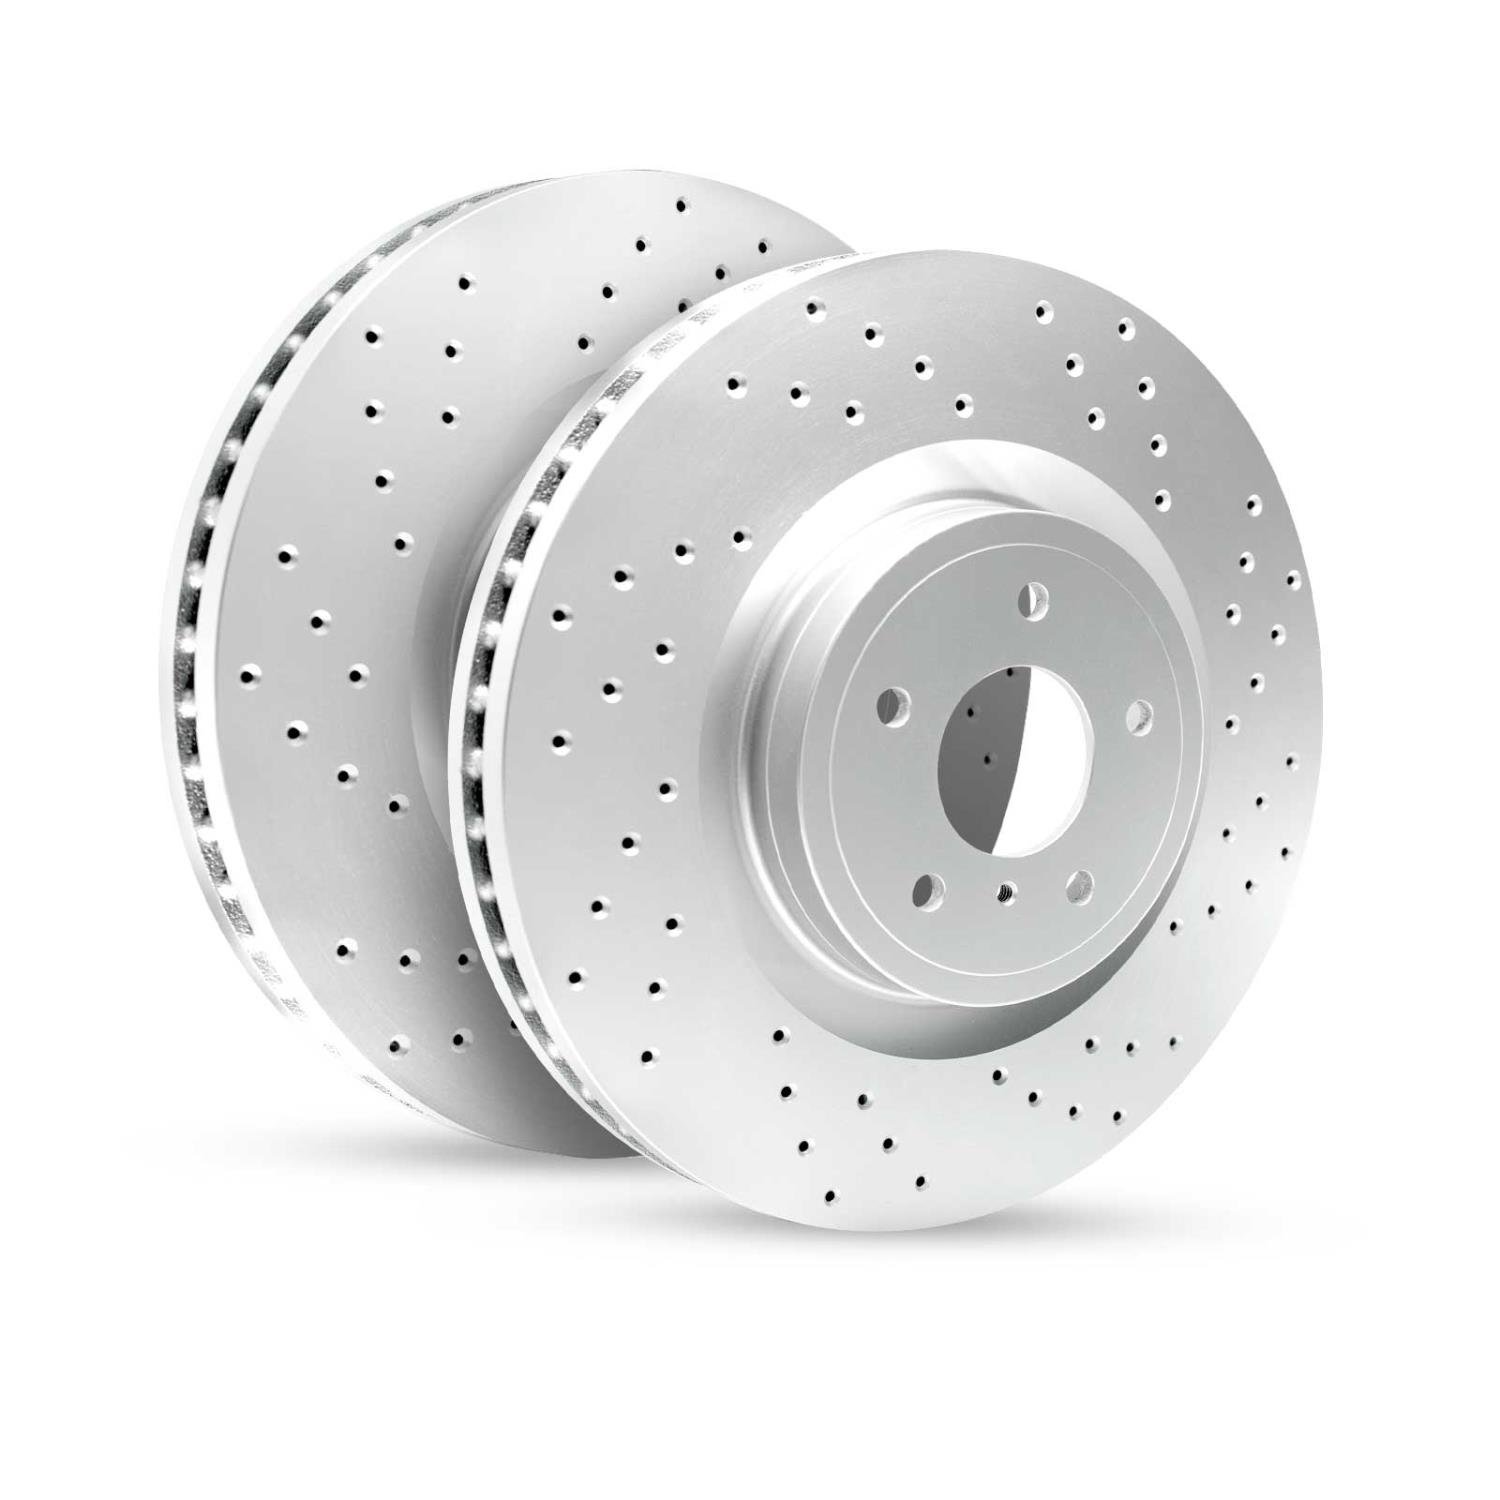 GEO-Carbon Drilled/Slotted Rotors, 1987-2015 Fits Multiple Makes/Models, Position: Rear